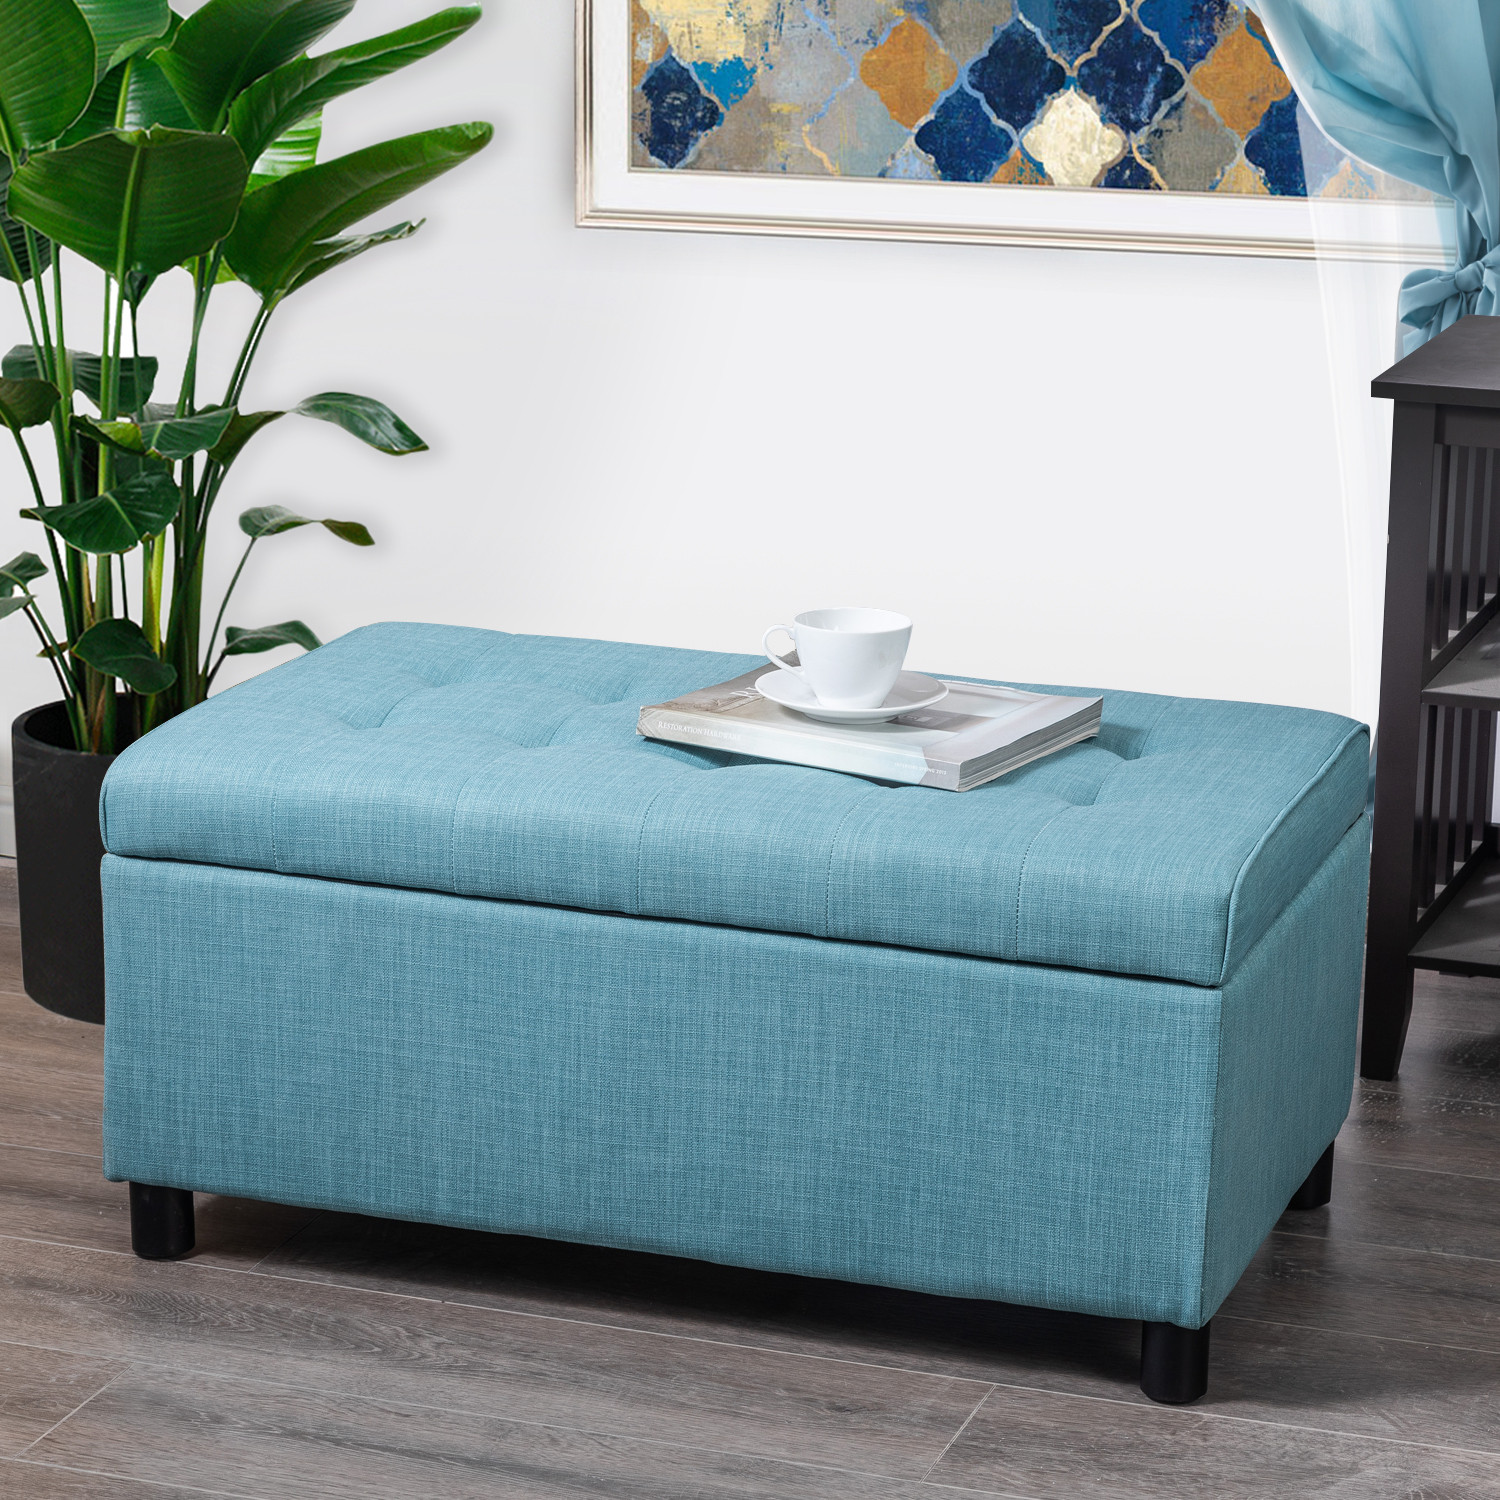 Turquoise Bench With Storage
 Joveco Classic Tufted Fabric Rectangular Ottoman Bench